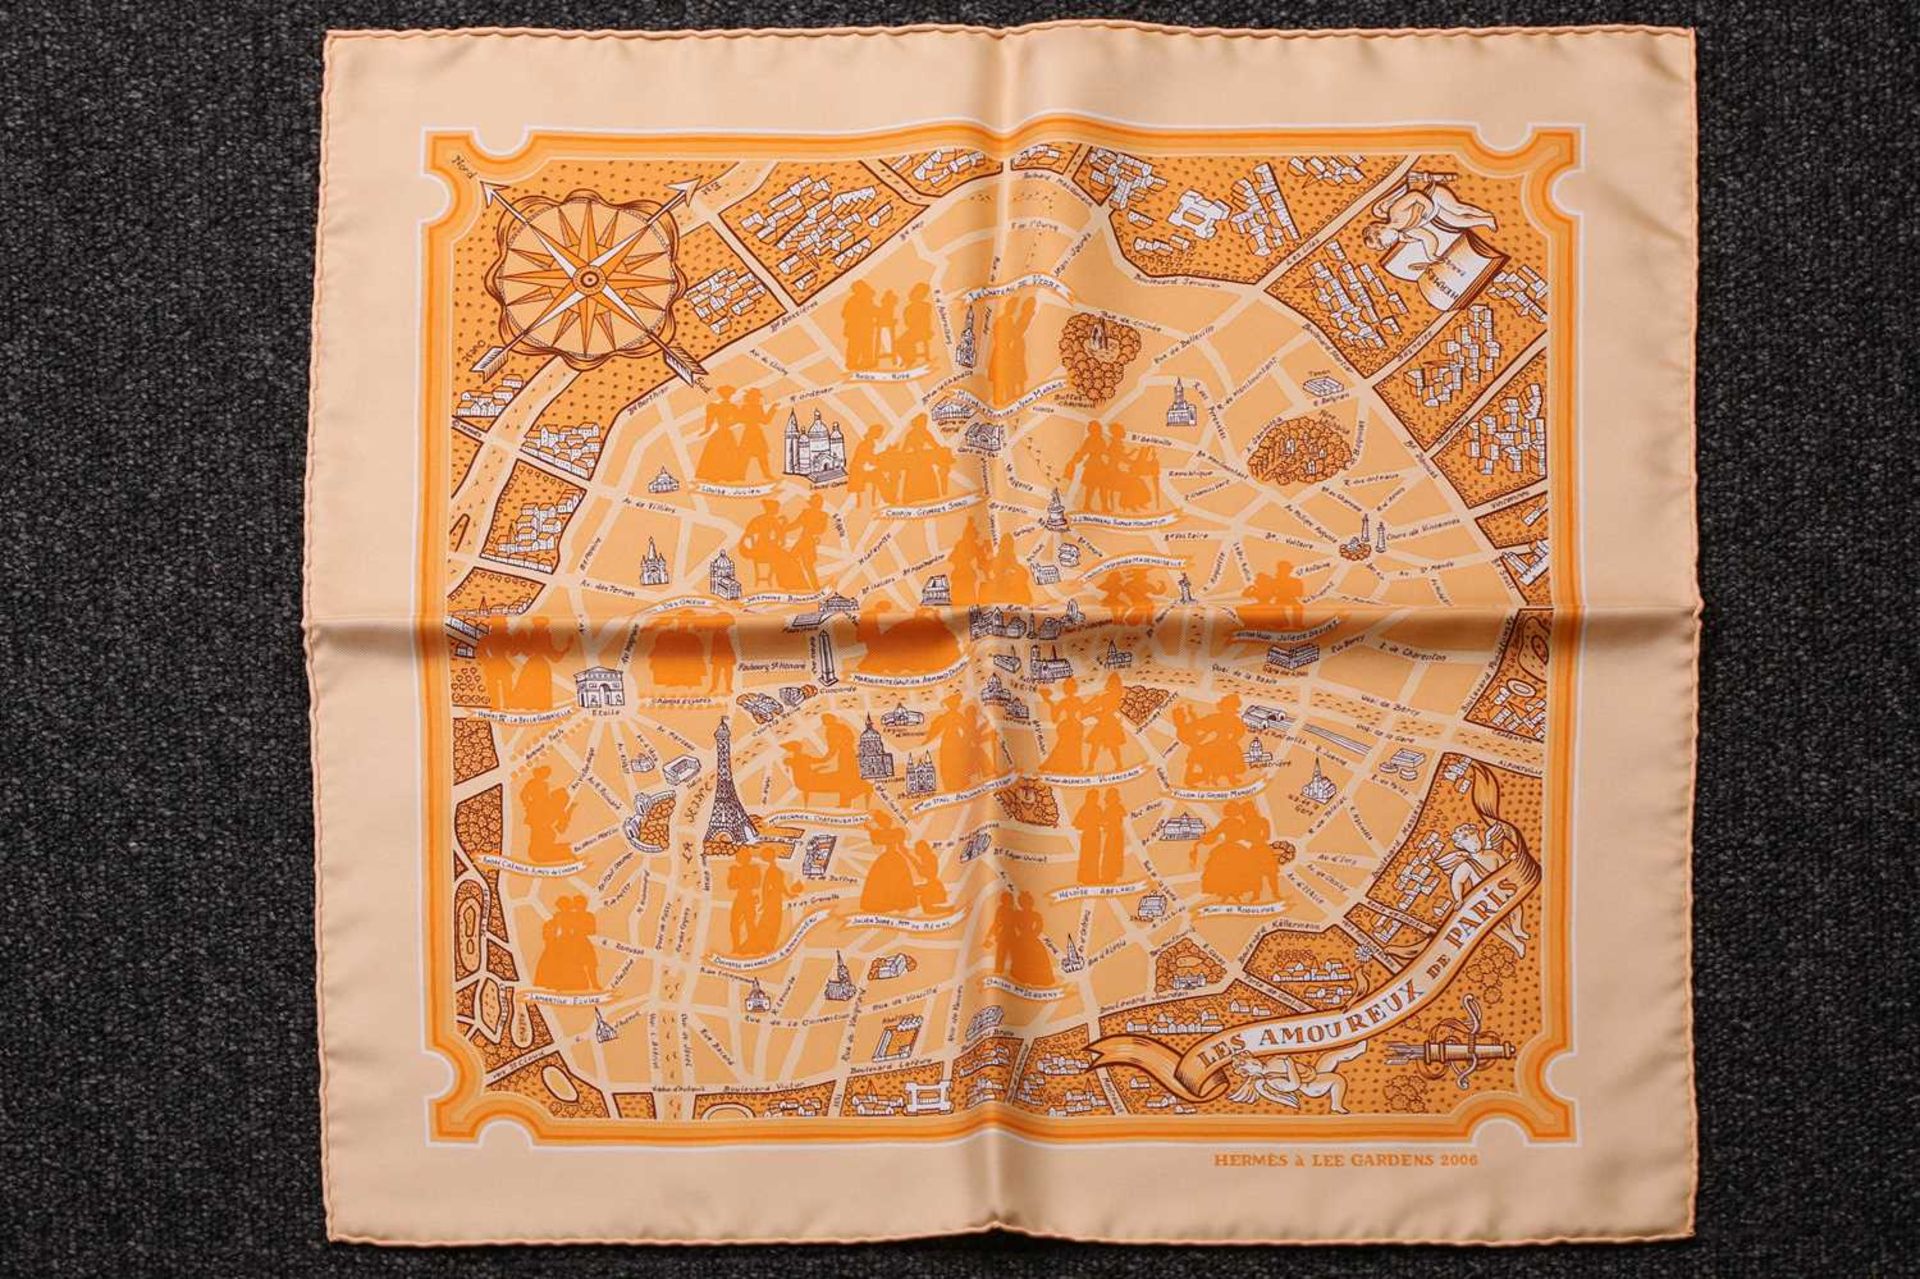 Two Hermes silk scarves; Les Amoreux de Paris limited edition to commemorate Hermes reopening the - Image 12 of 17